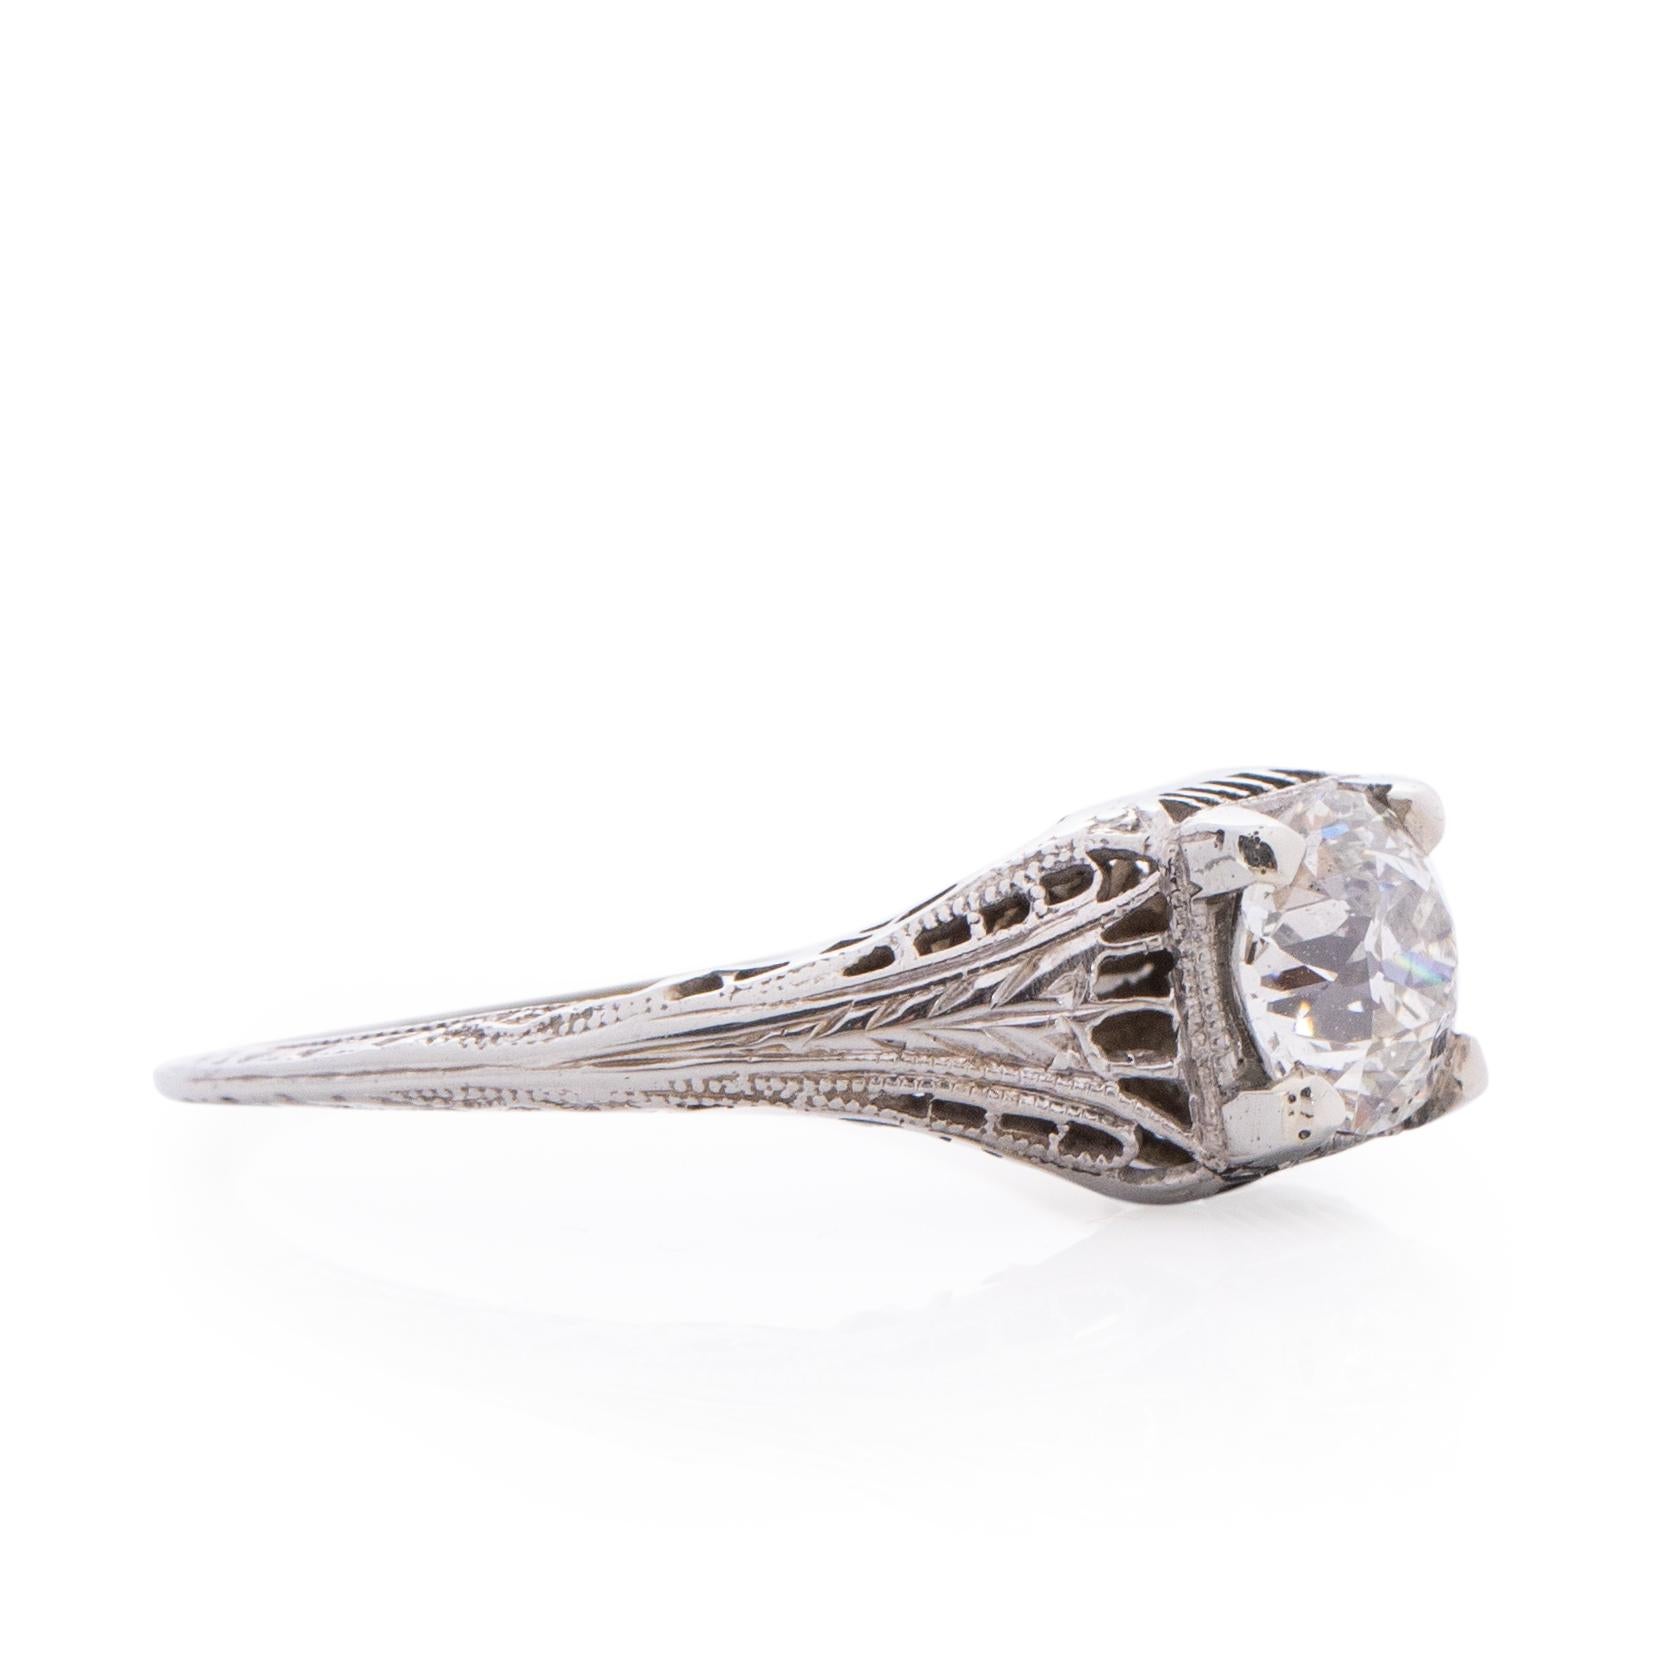 The gallery on this art deco filigree ring is outstanding! The geometric line design is intricate and clean, great condition for its age. This beautiful detail wraps up the shanks and holds a .90CT VS1 clarity diamond that is breath taking. The